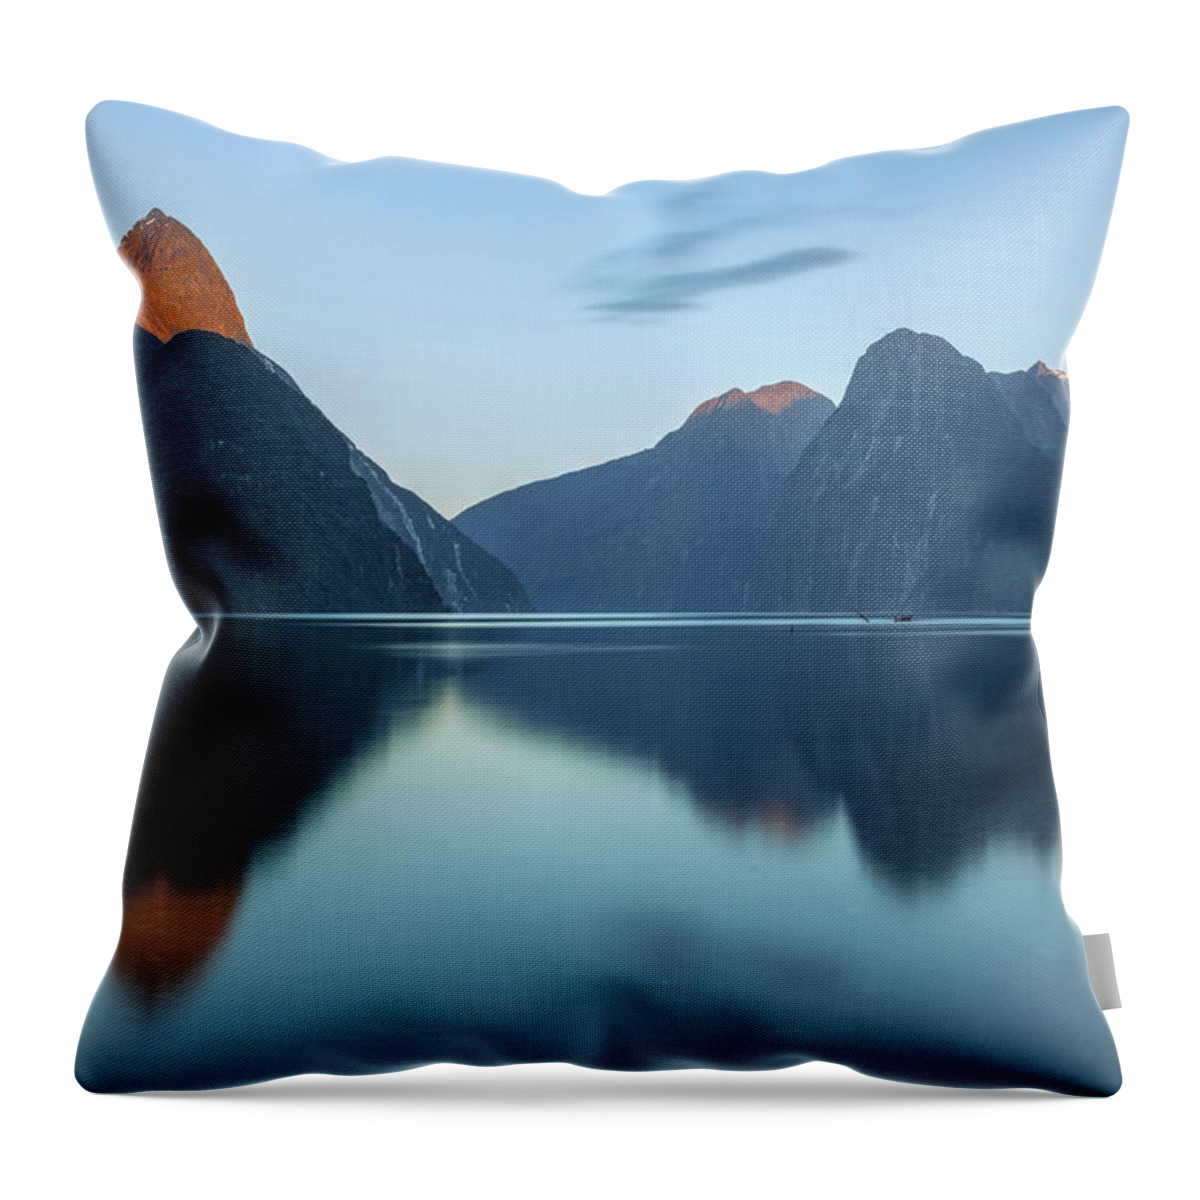 Milford Sound Throw Pillow featuring the photograph Milford Sound - New Zealand #2 by Joana Kruse